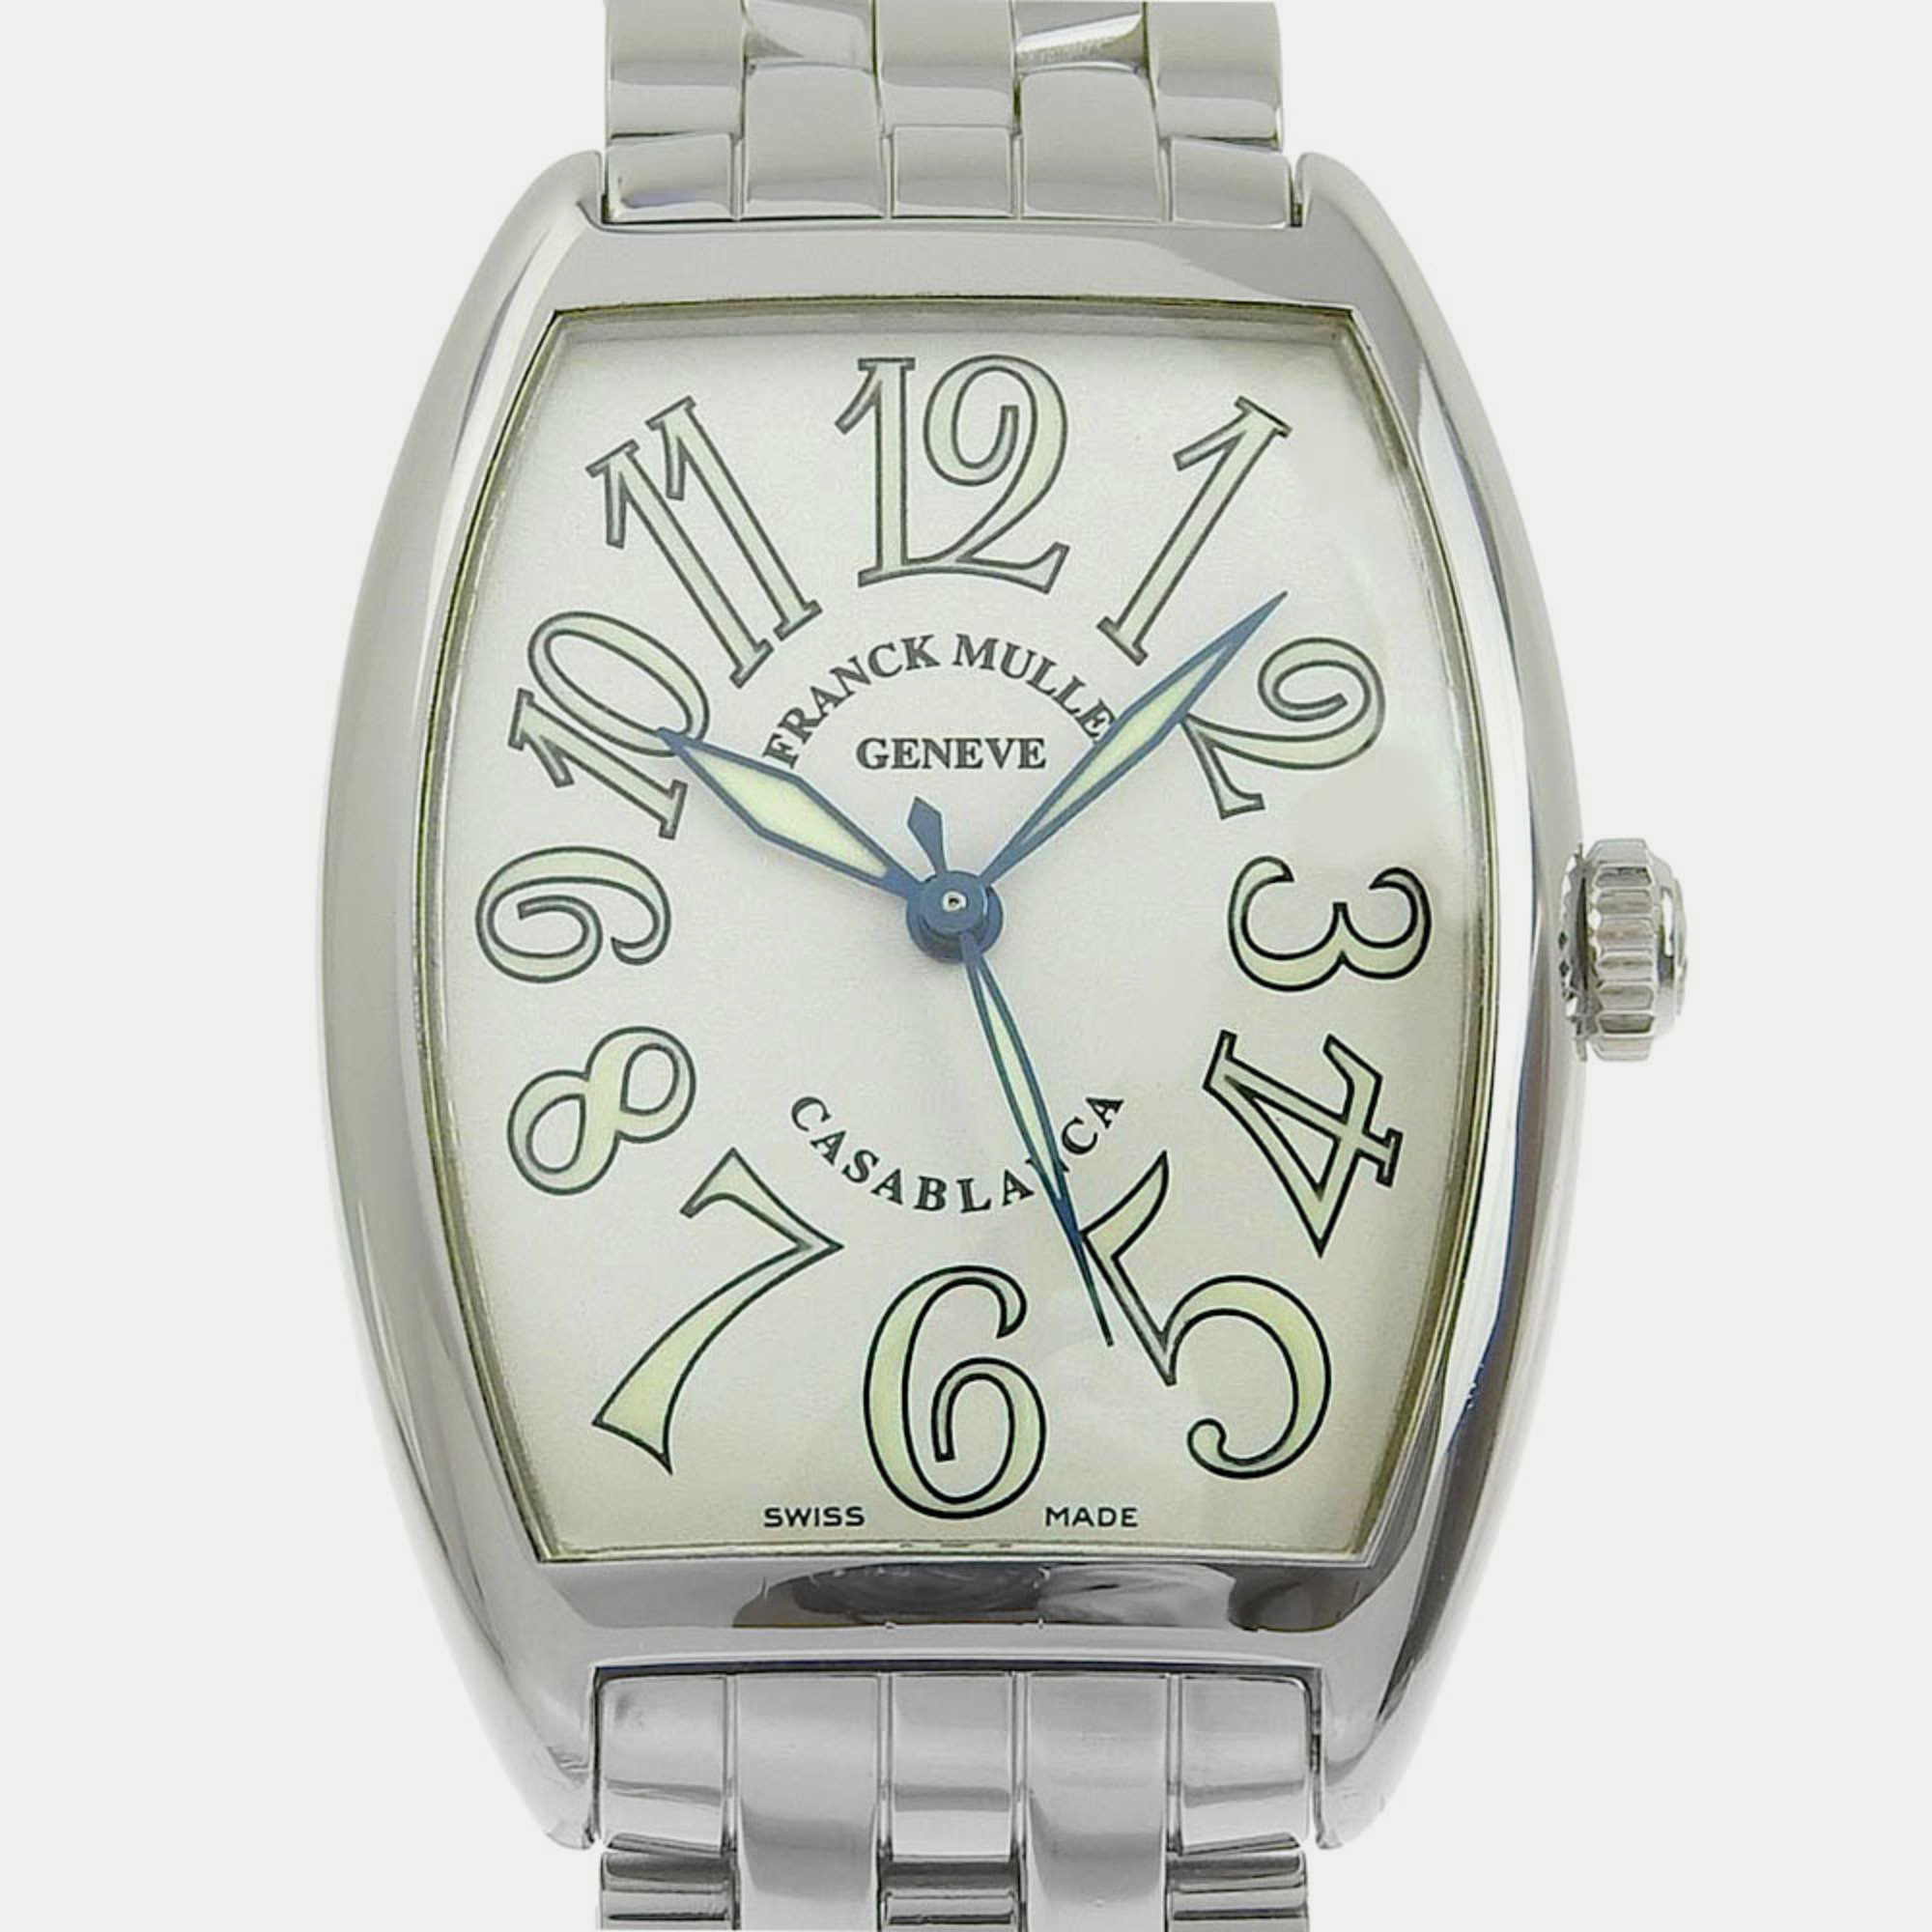 Franck muller white stainless steel casablanca automatic men's wristwatch 31 mm